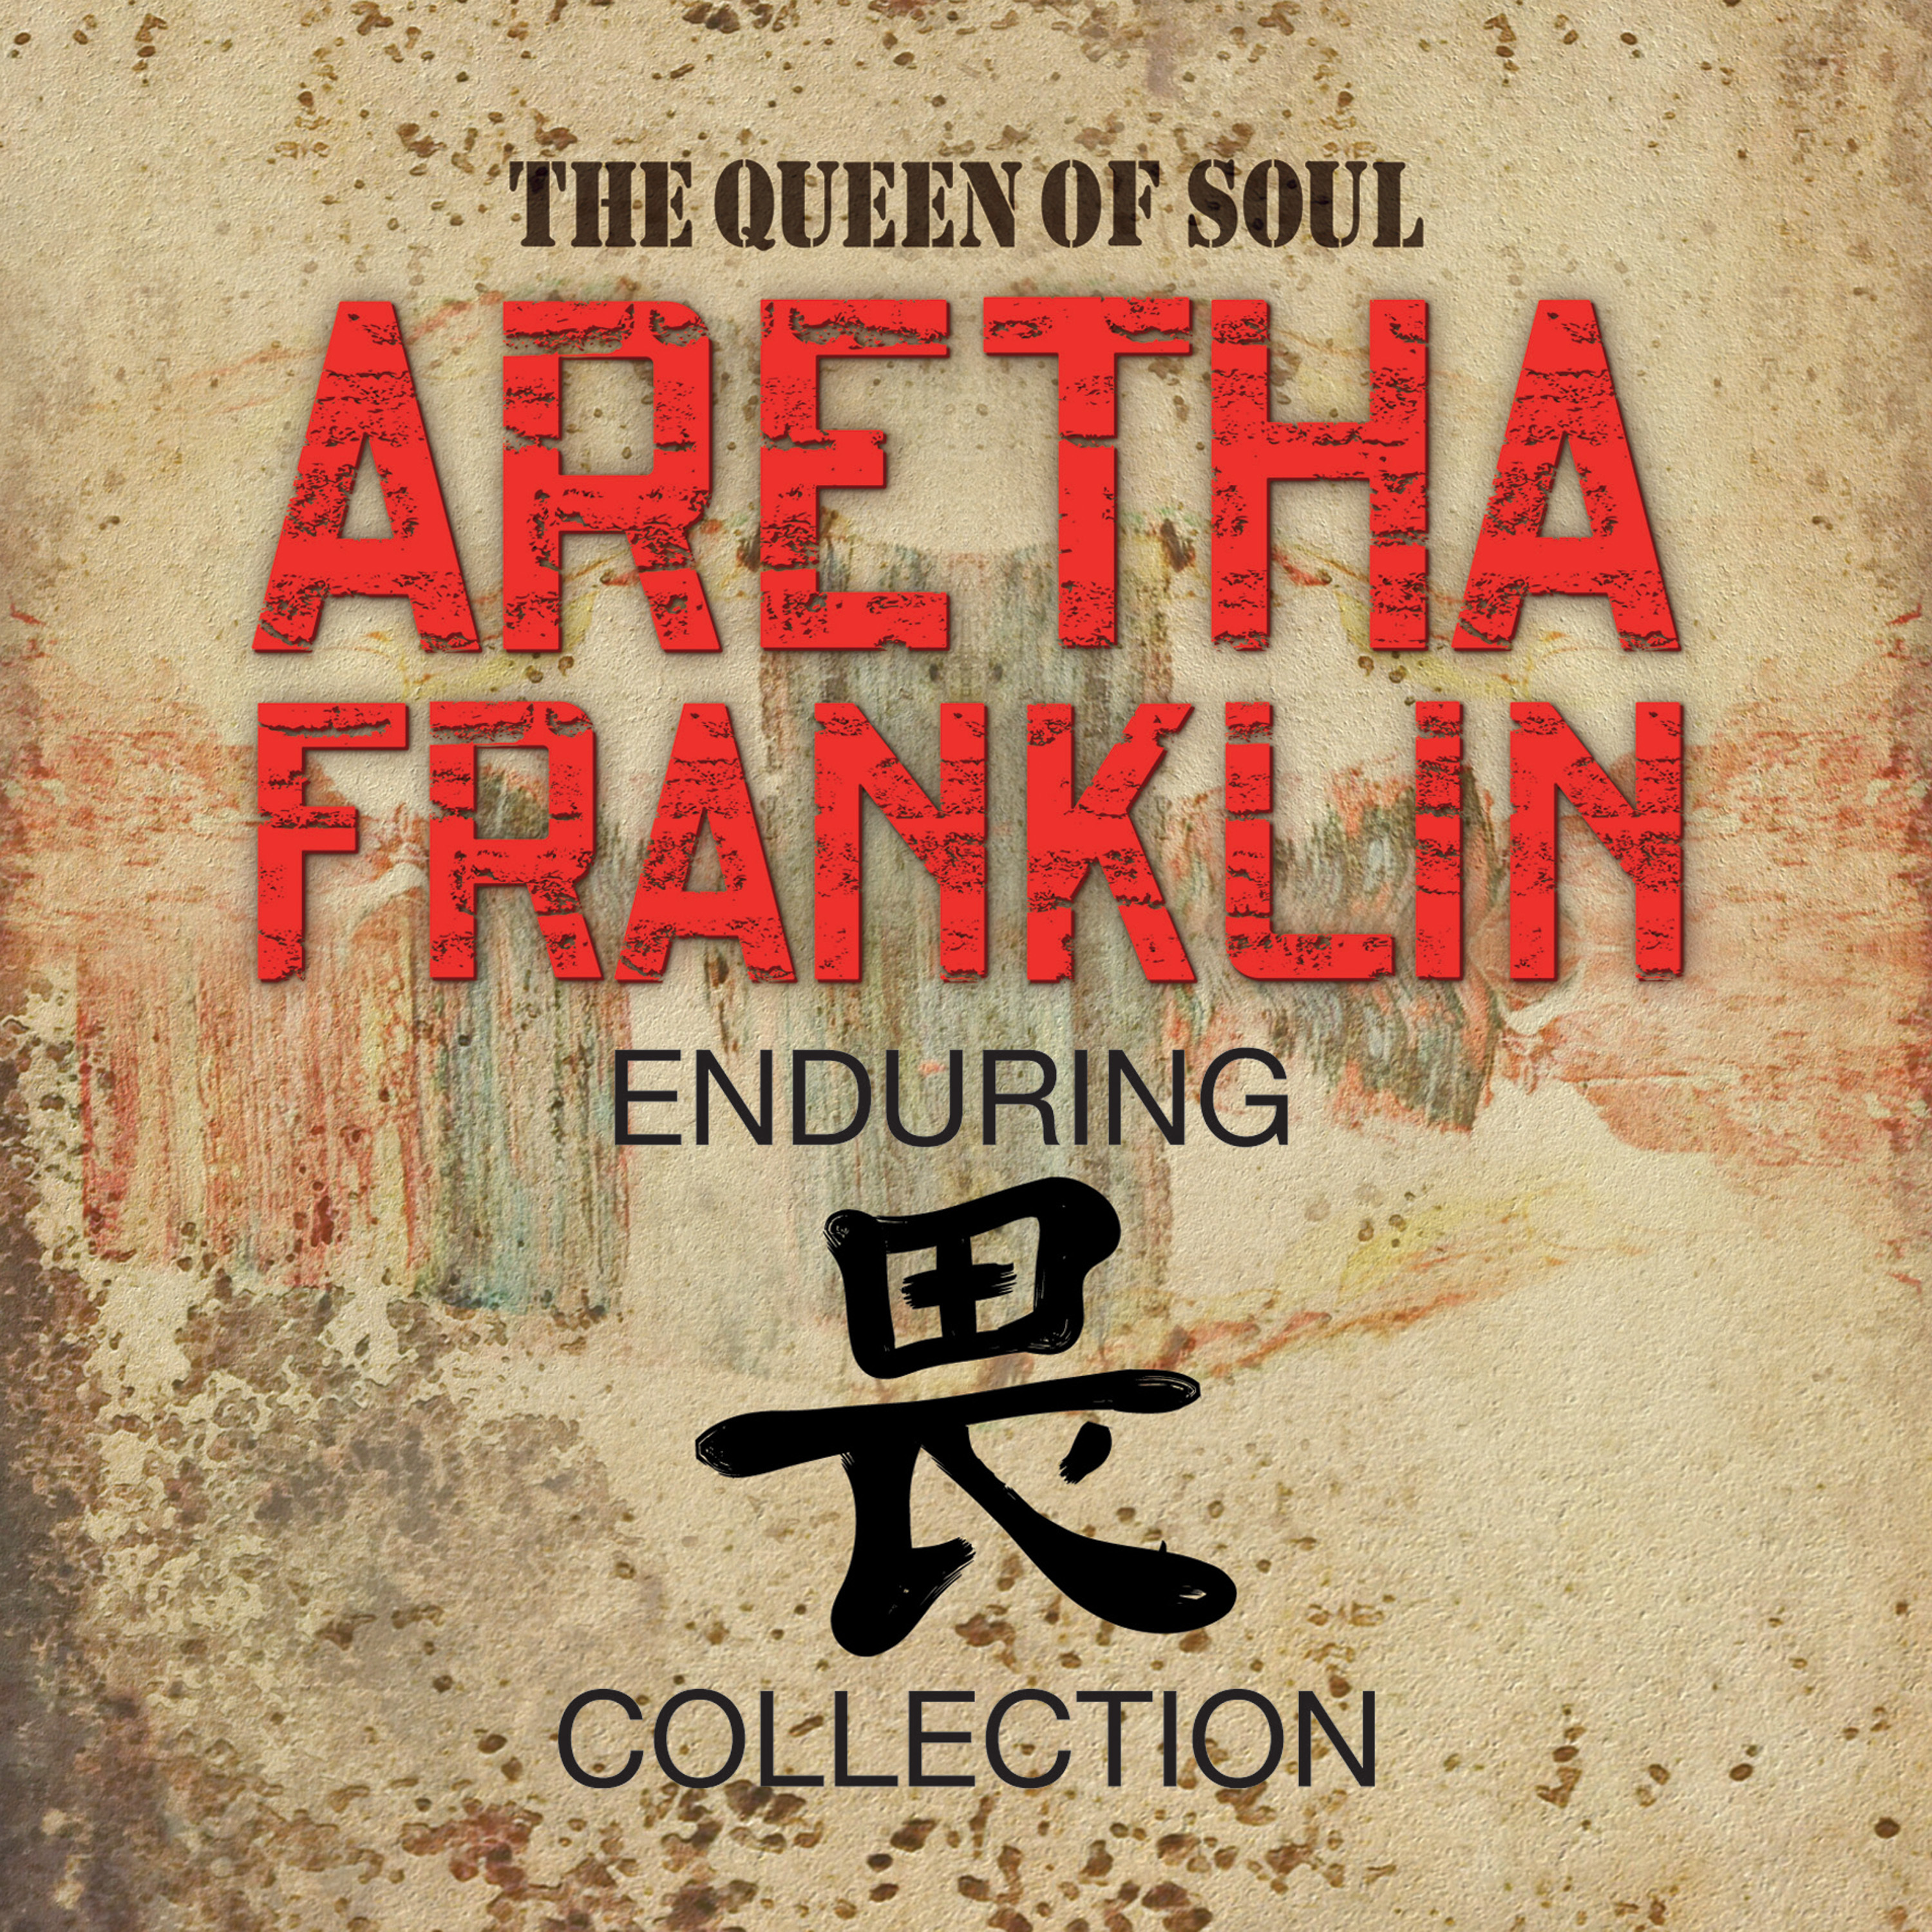 The Queen Of Soul  Aretha Franklin  Enduring Respect Collection  Digitally ReMastered